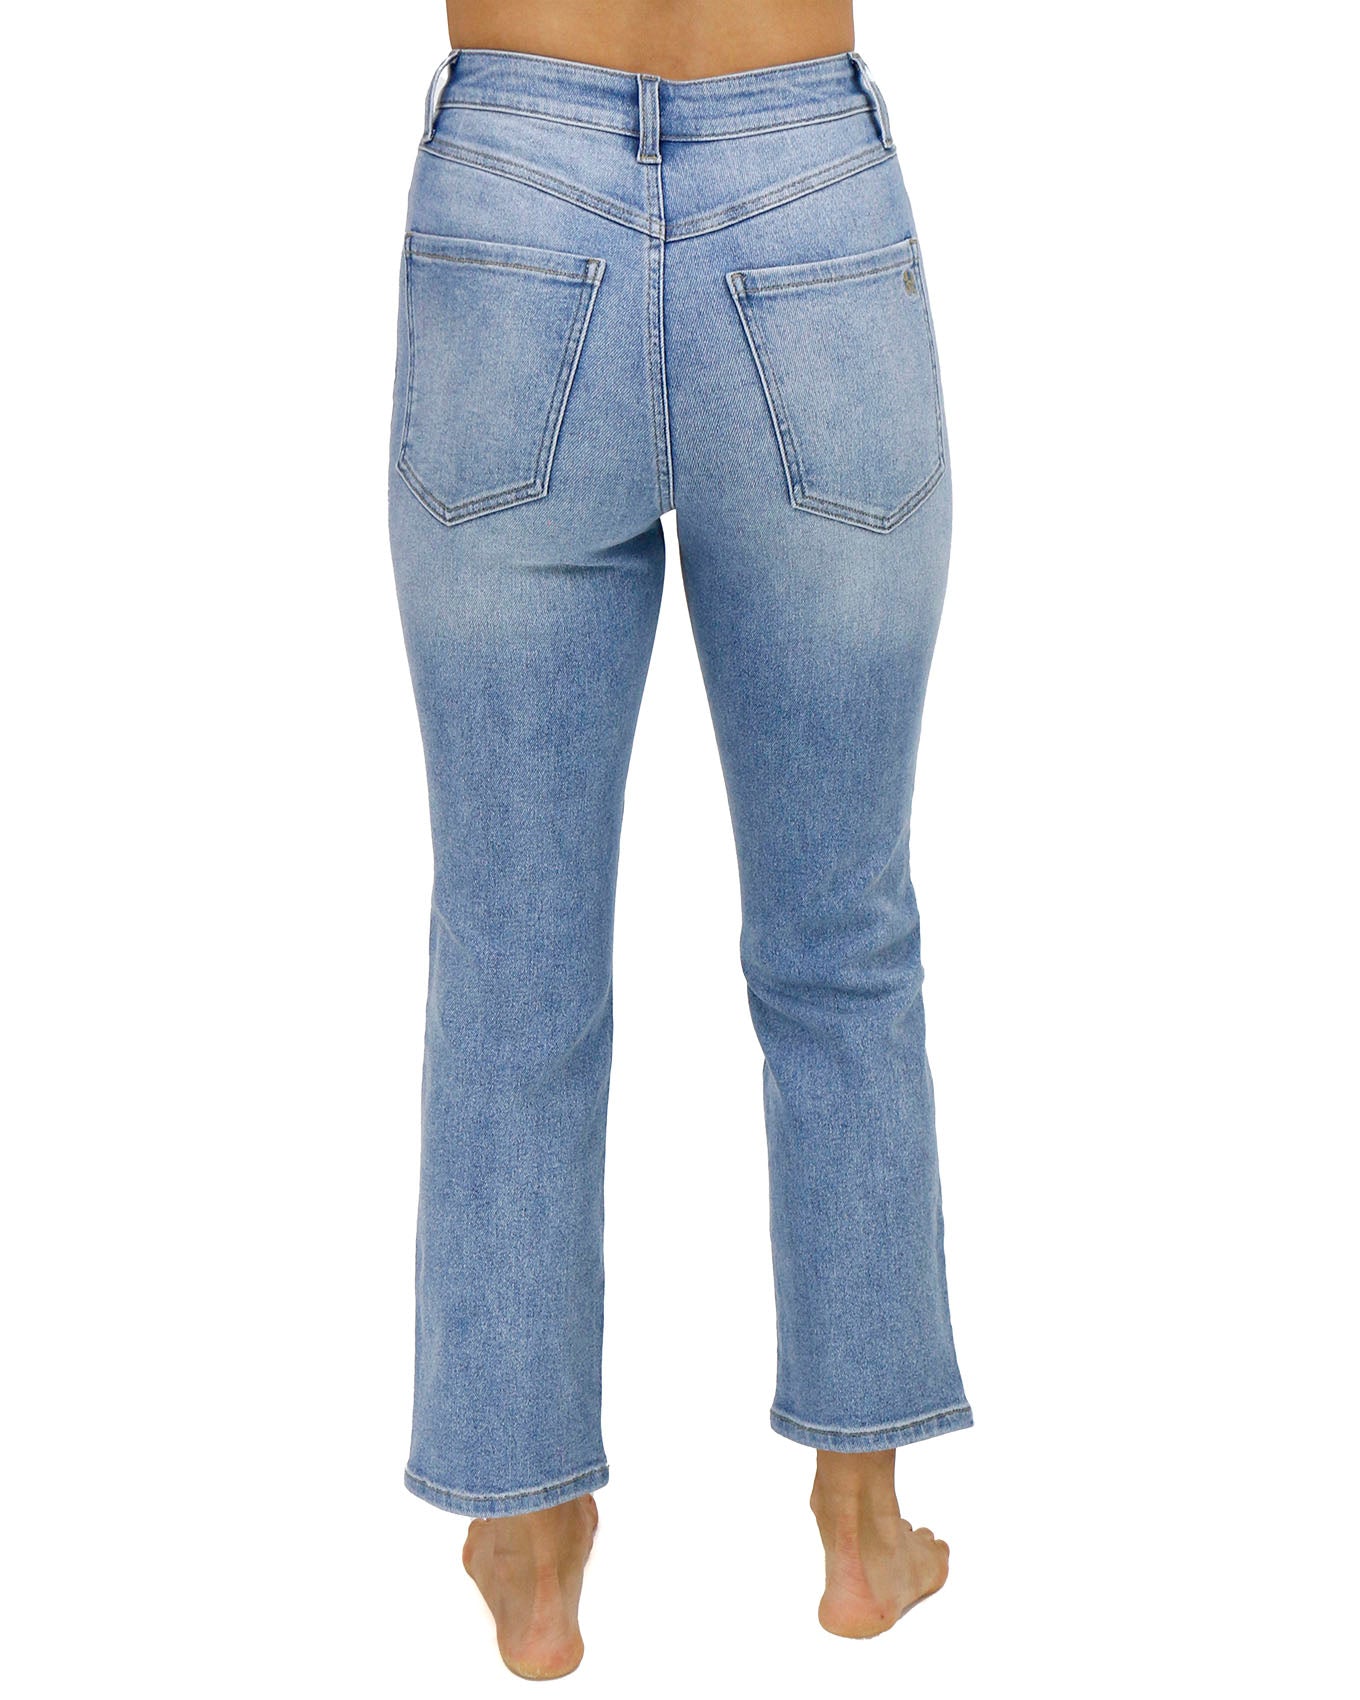 back view stock shot of premium high waisted mom jeans in non distressed mid-wash